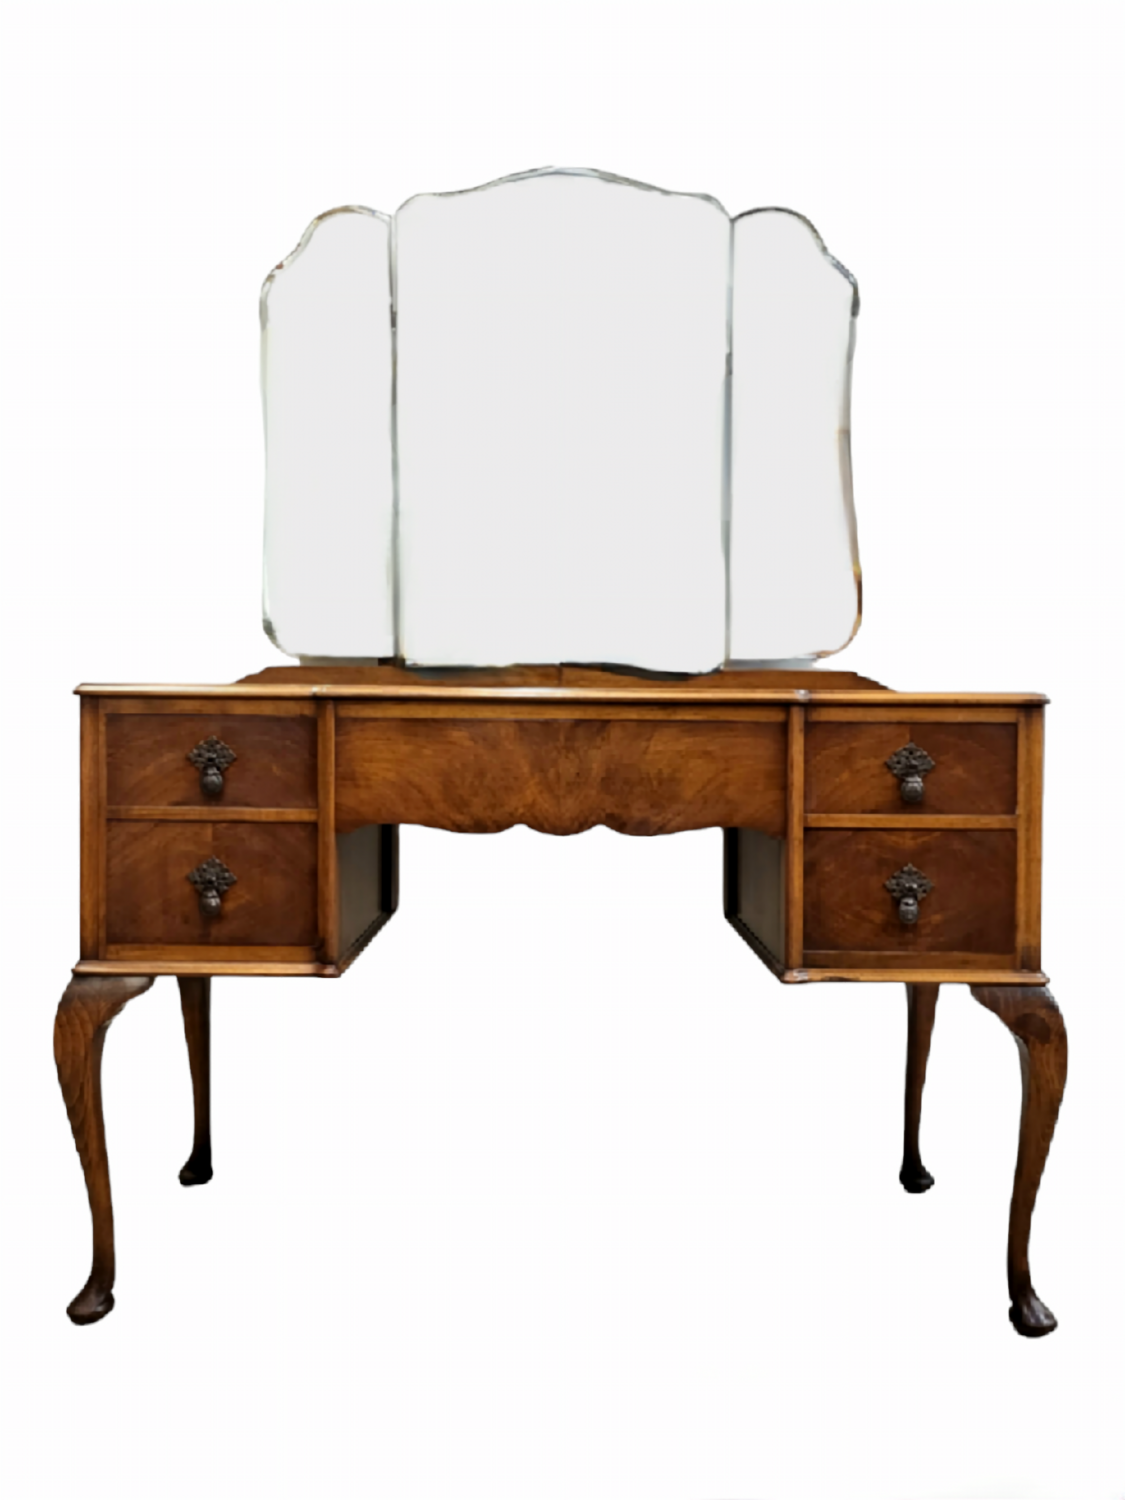 Antique Walnut Vanity Table with Mirrors